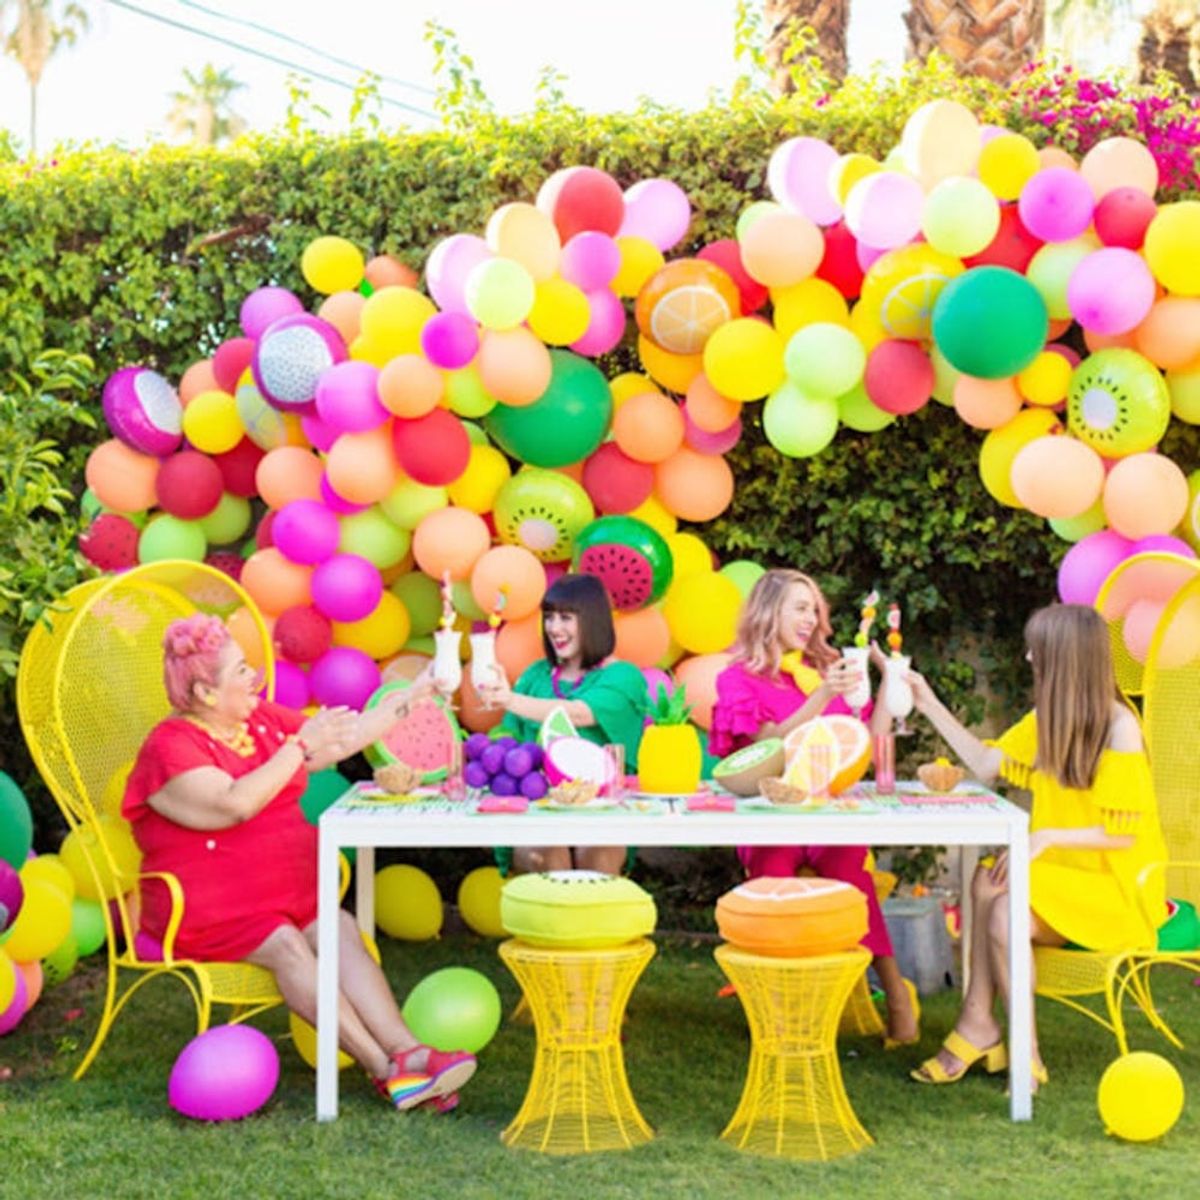 Keep It Cool With These 11 Fun Summer-Party Themes